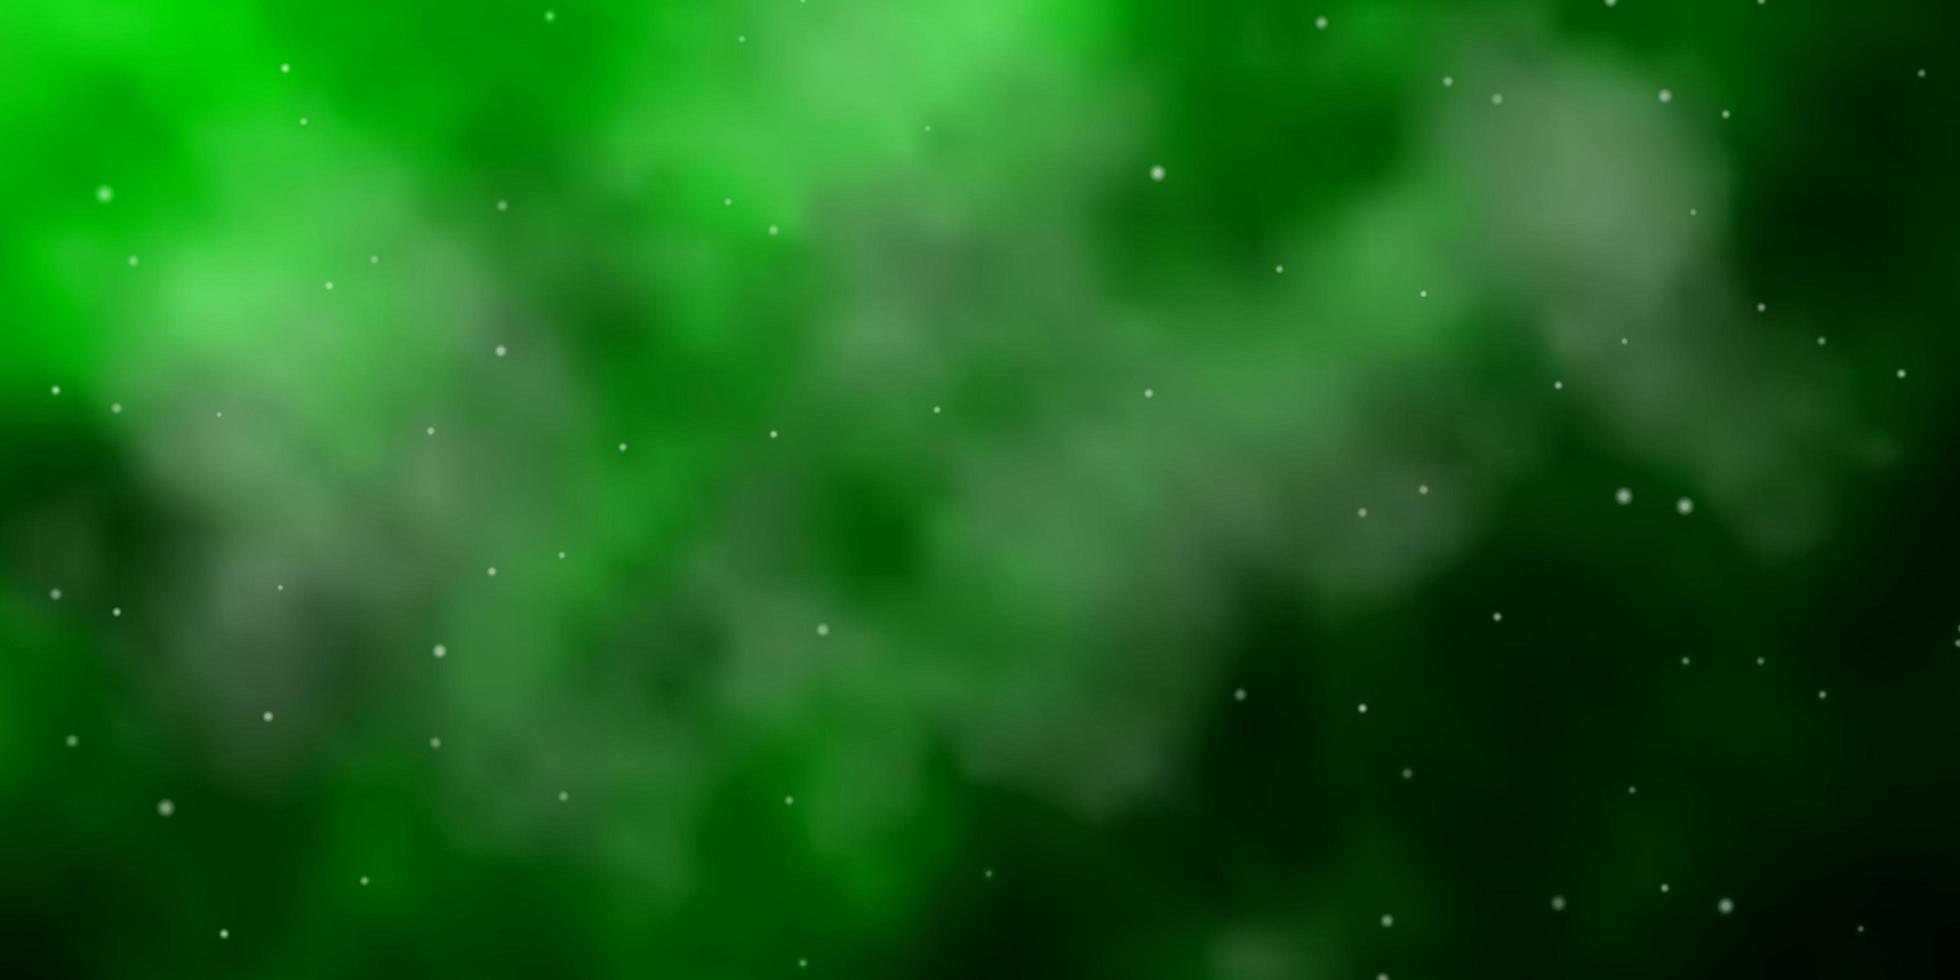 Light Green template with neon stars. vector